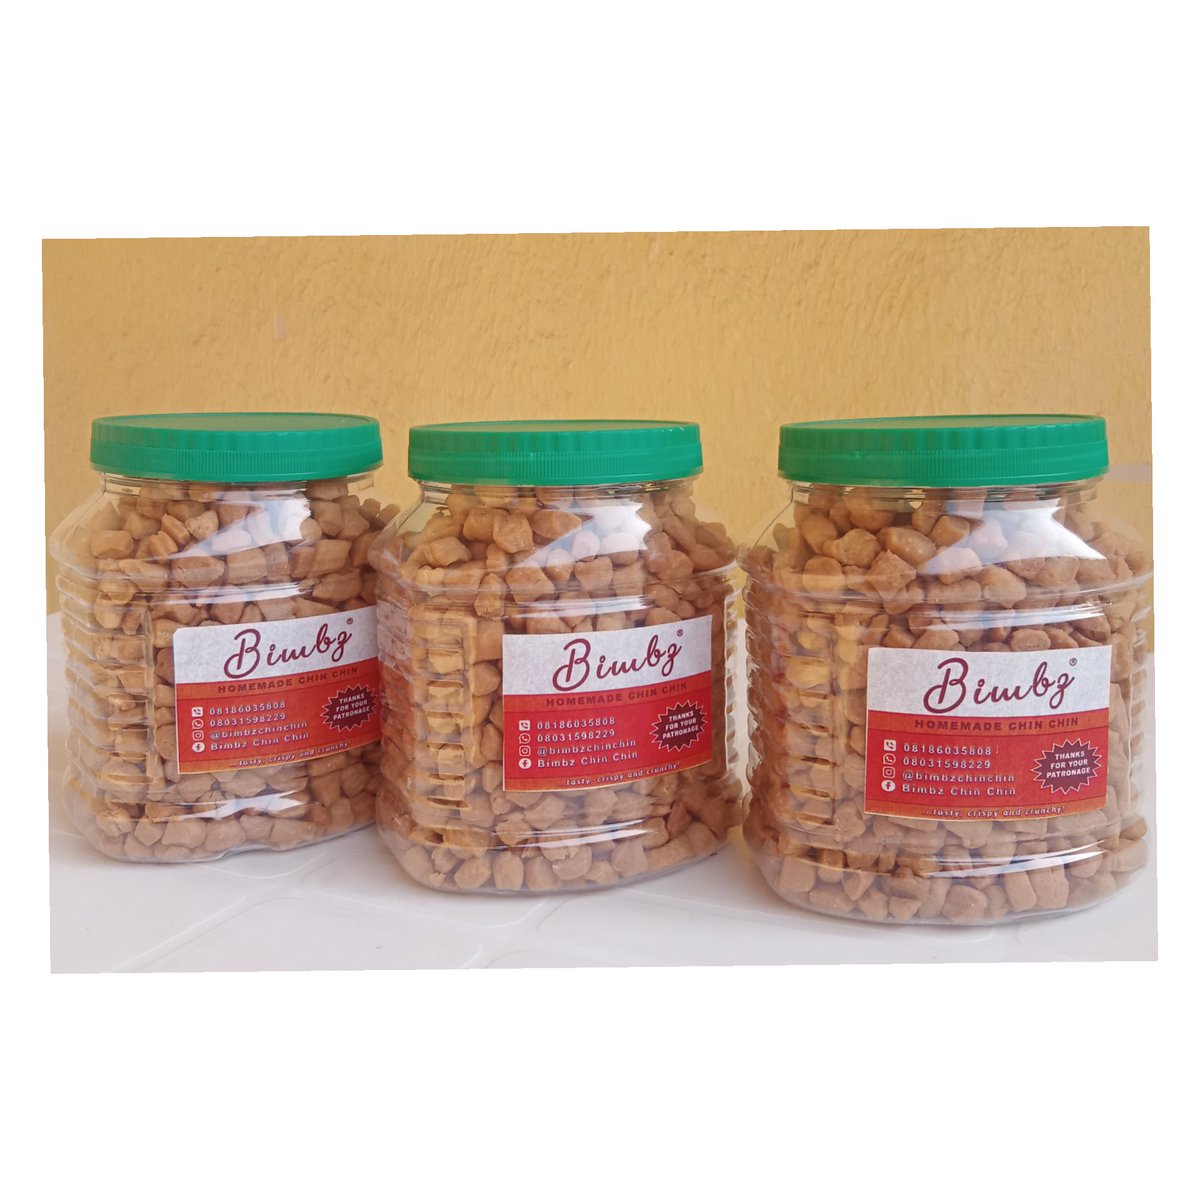 Satisfy your sweet tooth with our yummy Medium Sized Chin Chin Jar. 🤤 Perfect for on-the-go snacking or to share with friends. Price: NGN 1,500 ✨

#bimbzchinchin #satisfyyourcravings #distanceisnotabarrier #wedeliveranywhere #contactus